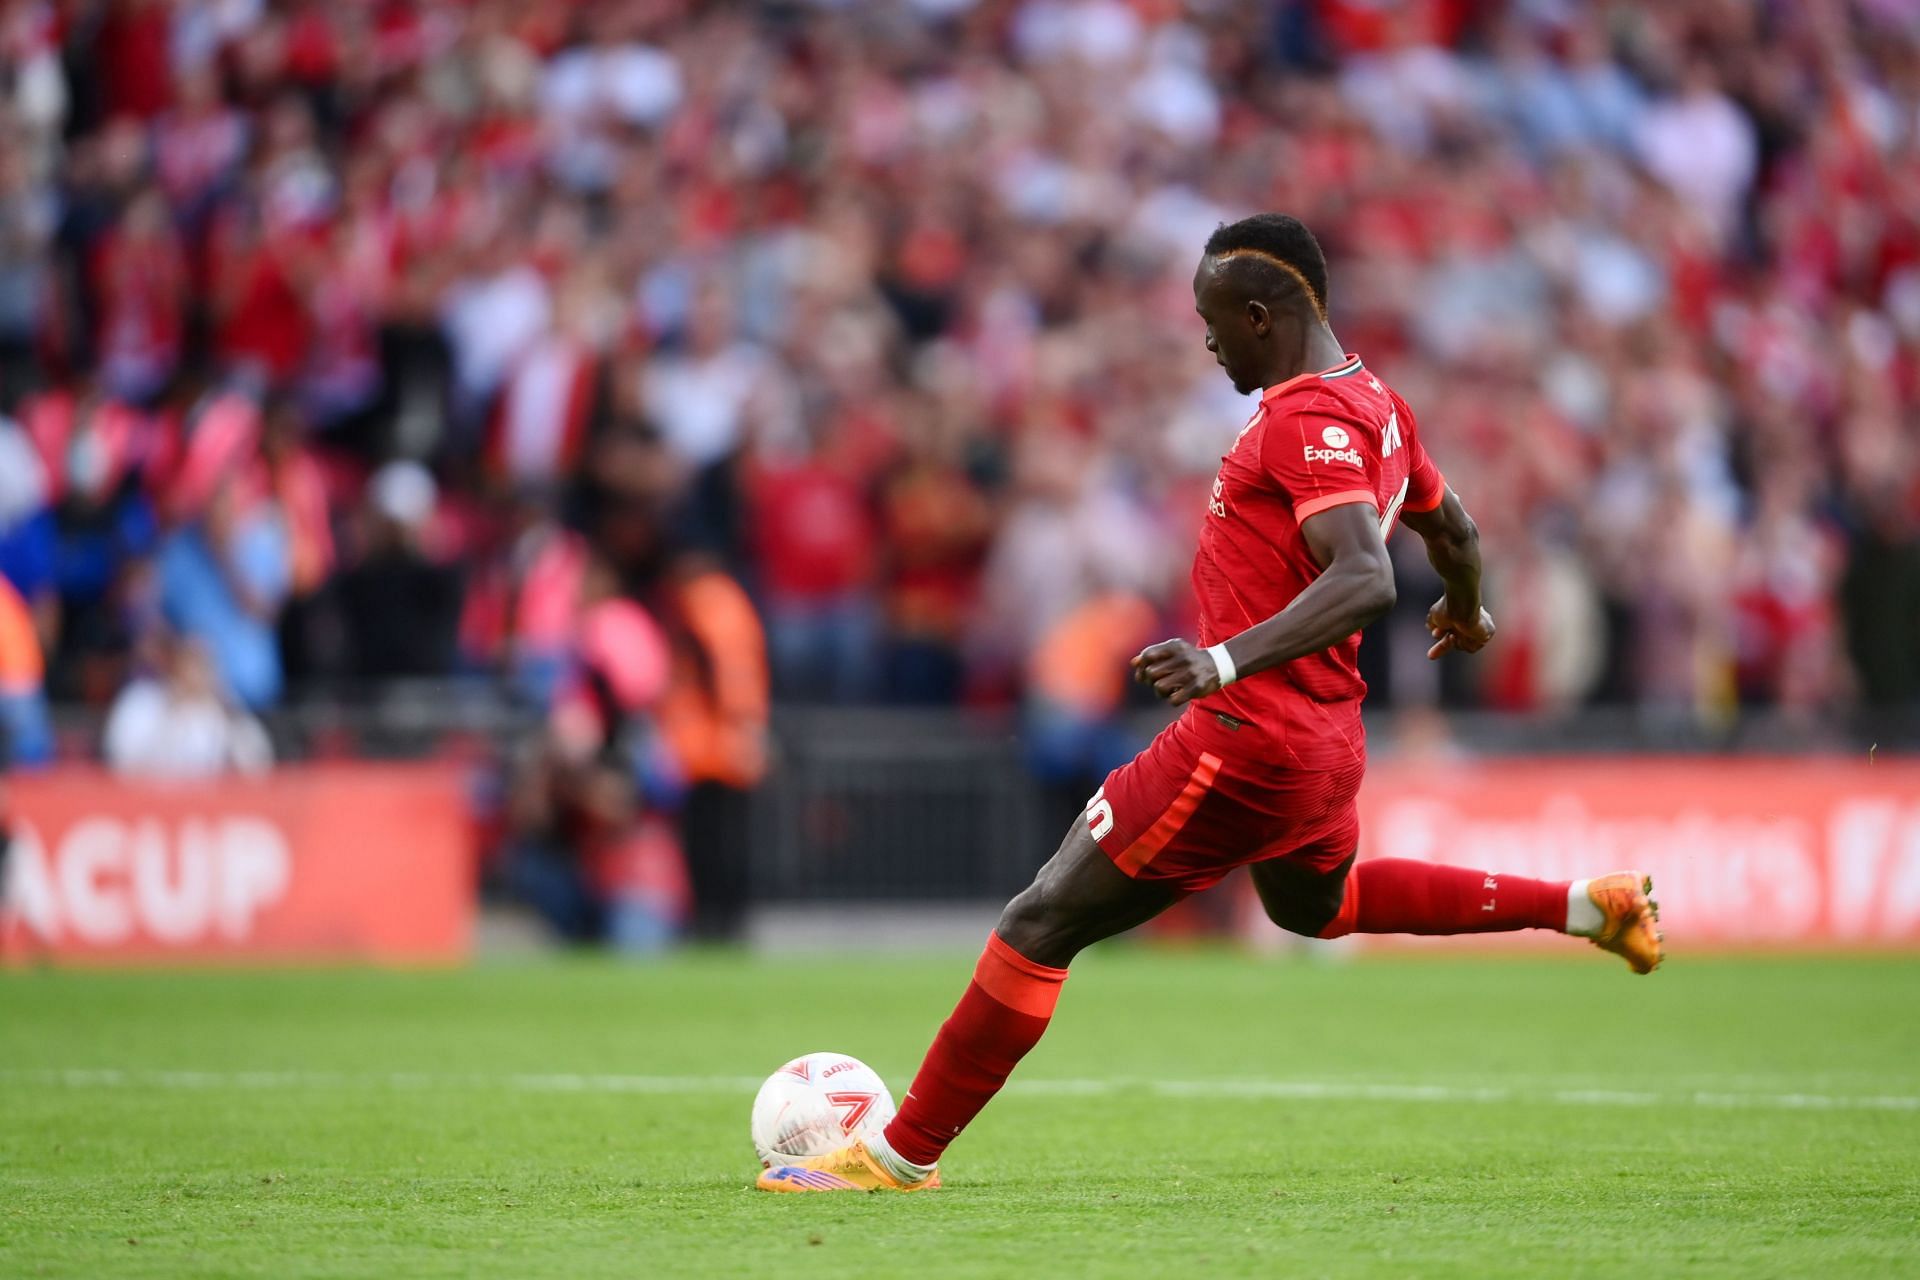 In-form Liverpool star Sadio Mane would be licking his lips against struggling Real Madrid center-back Eder Militao